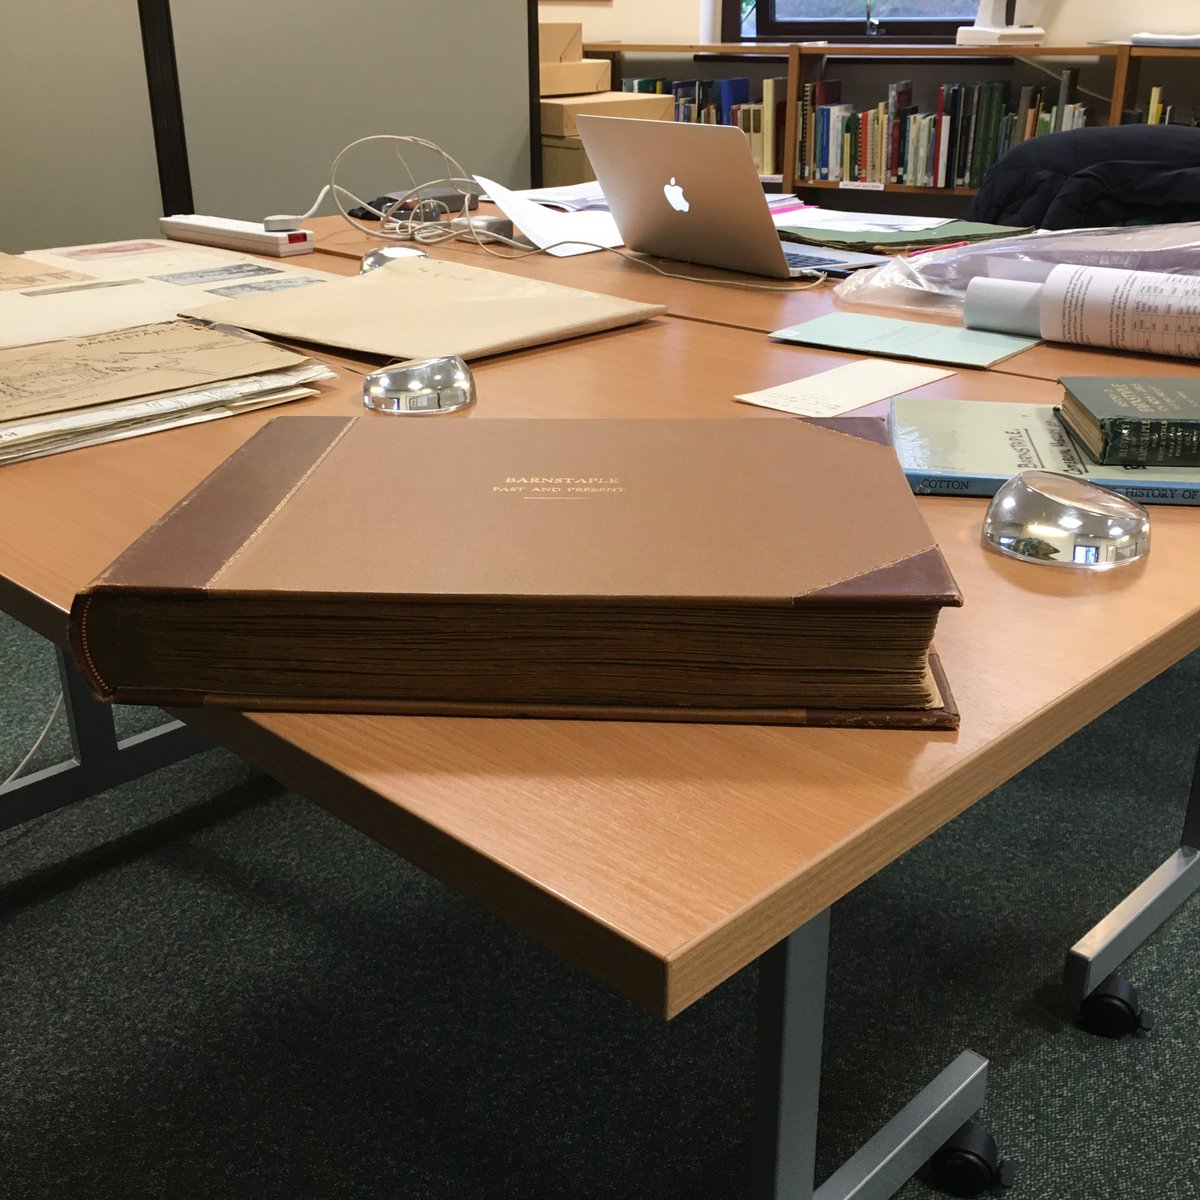 We've come to the end of #exploreyourarchiveweek and this was the scene in the department of Friday...#WatchThisSpace in 2022 to find out what we were up to!
#watchthisspace 
#EYAWatchThisSpace
#exploreyourarchive 
#thistimenextyear